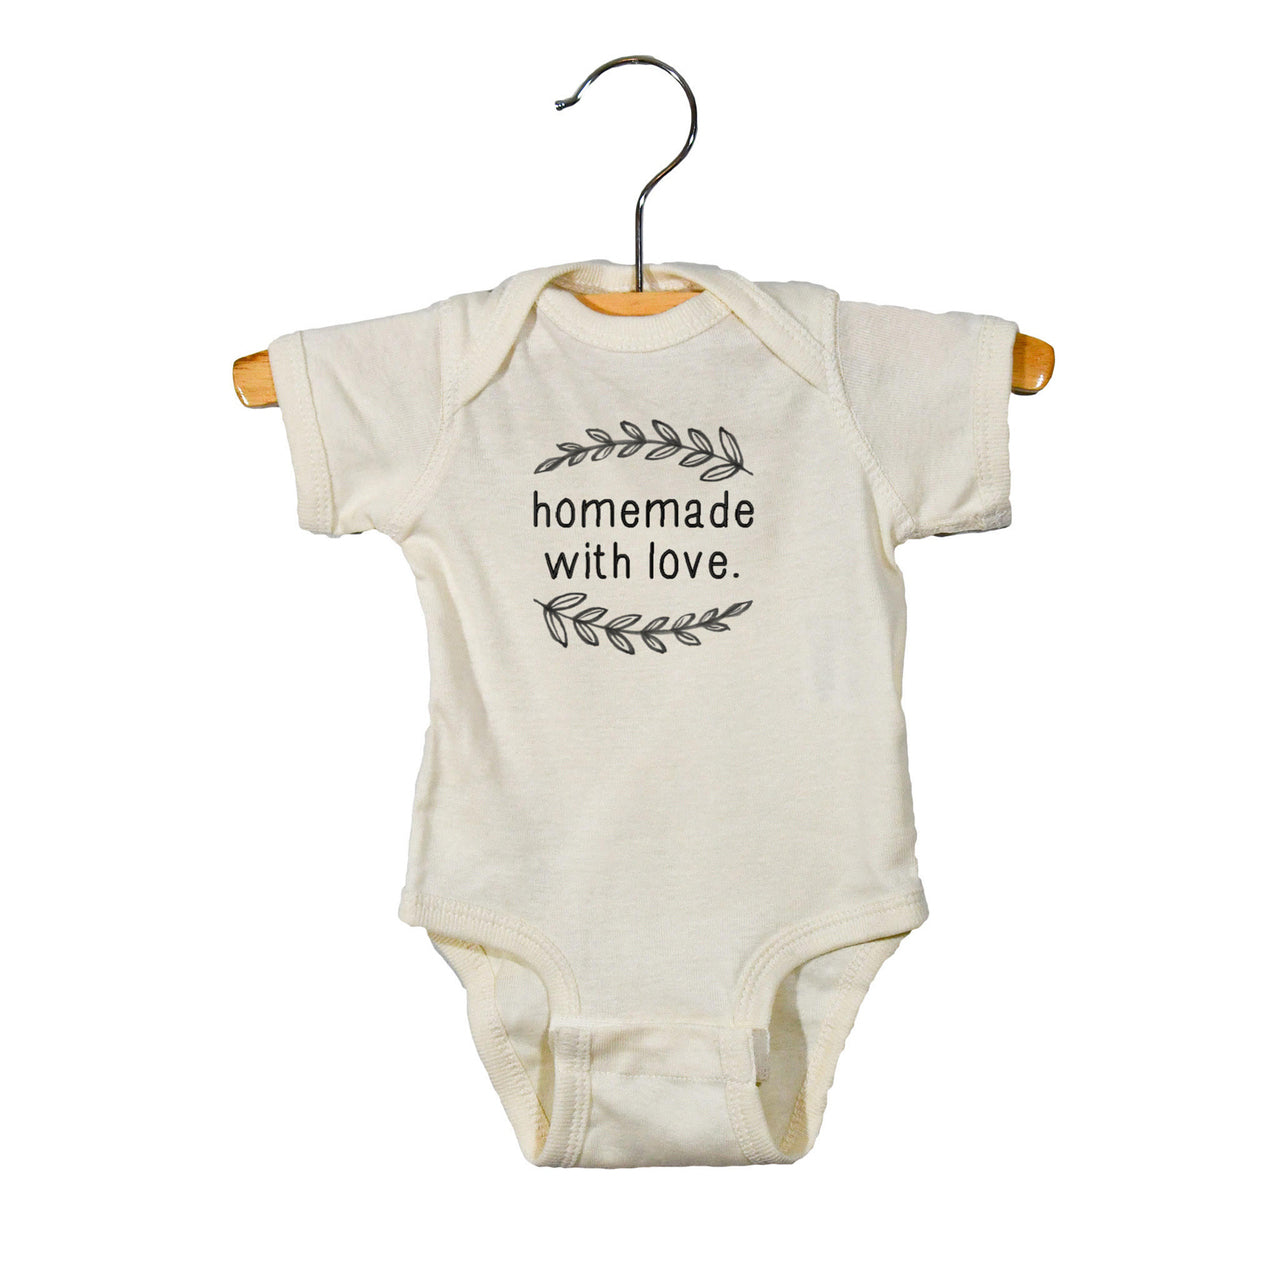 SpearmintLOVE’s baby Graphic Bodysuit, Homemade With Love